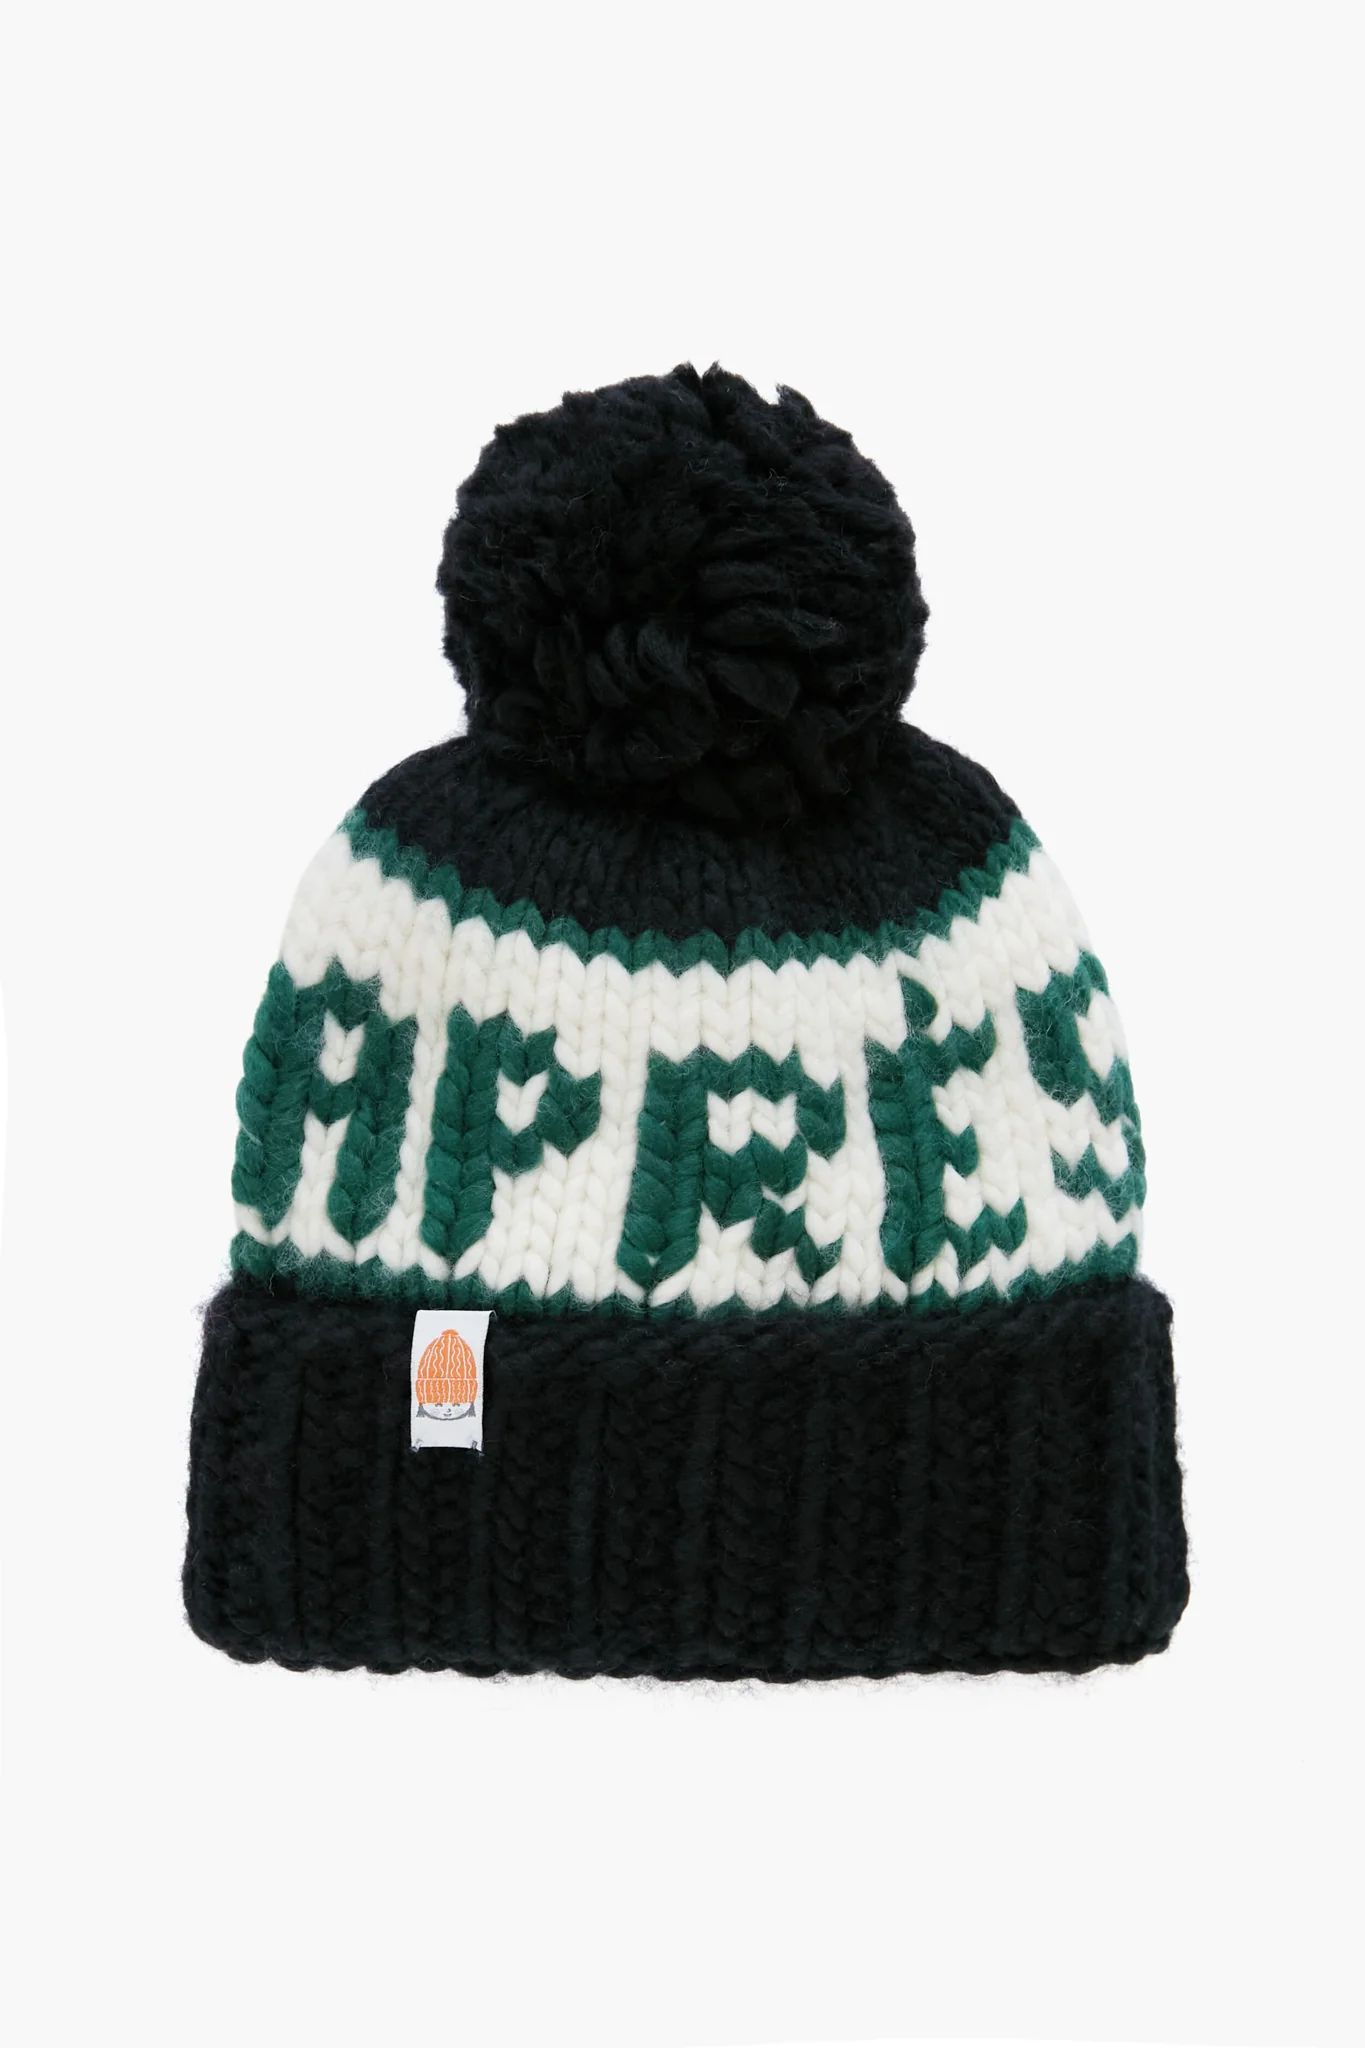 Exclusive Black and Forest Apres Beanie | Tuckernuck (US)